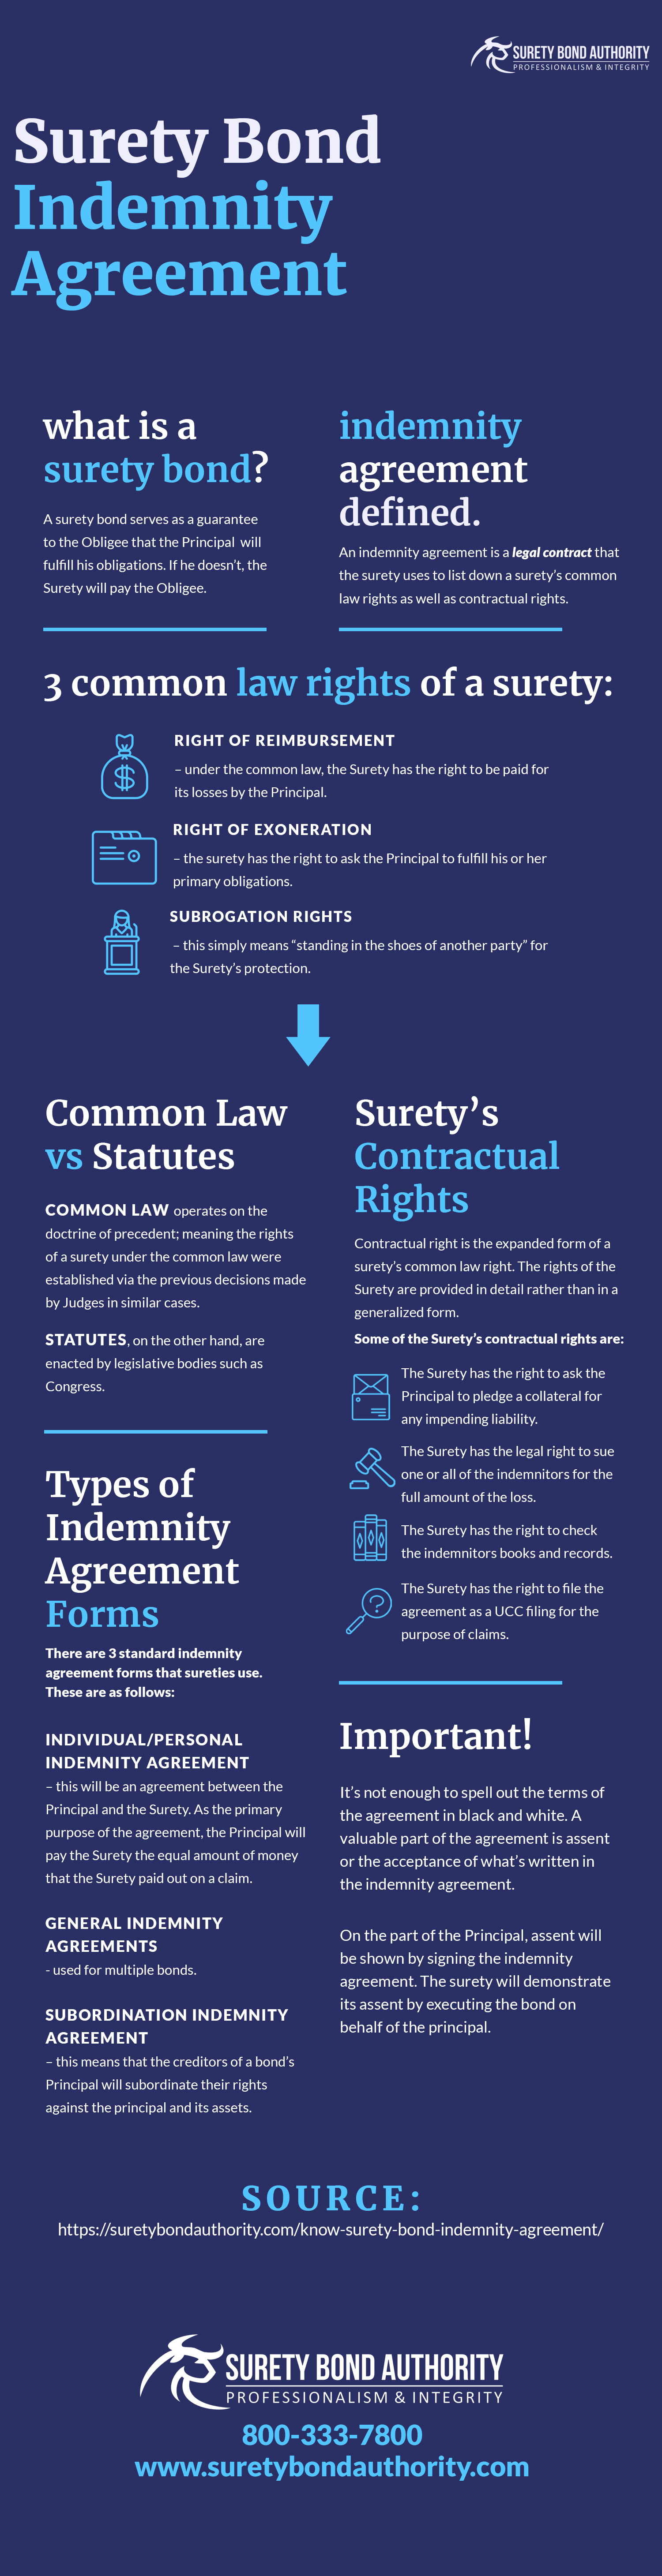 Indemnity Agreement Infographic